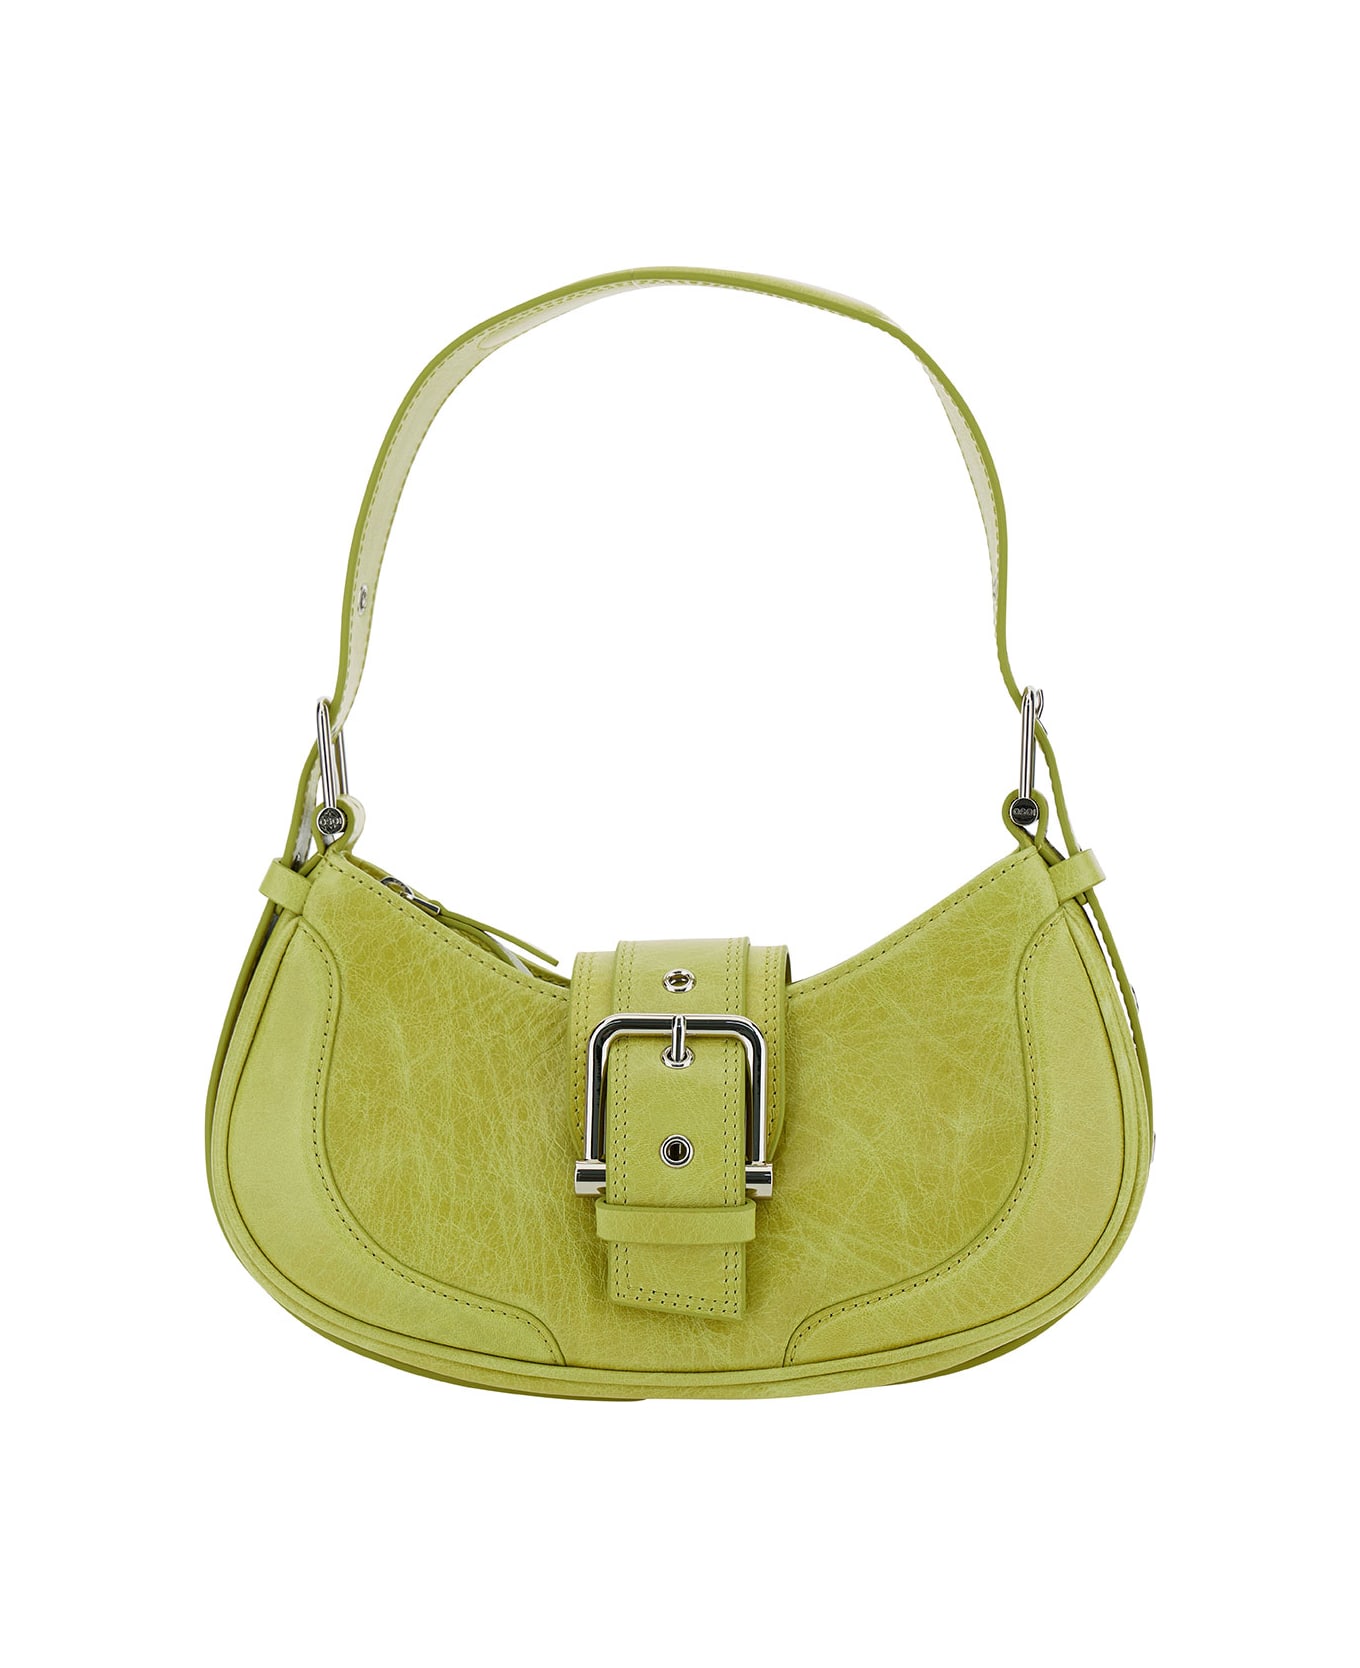 OSOI 'hobo Brocle' Yellow Shoulder Bag In Hammered Leather Woman - Yellow トートバッグ